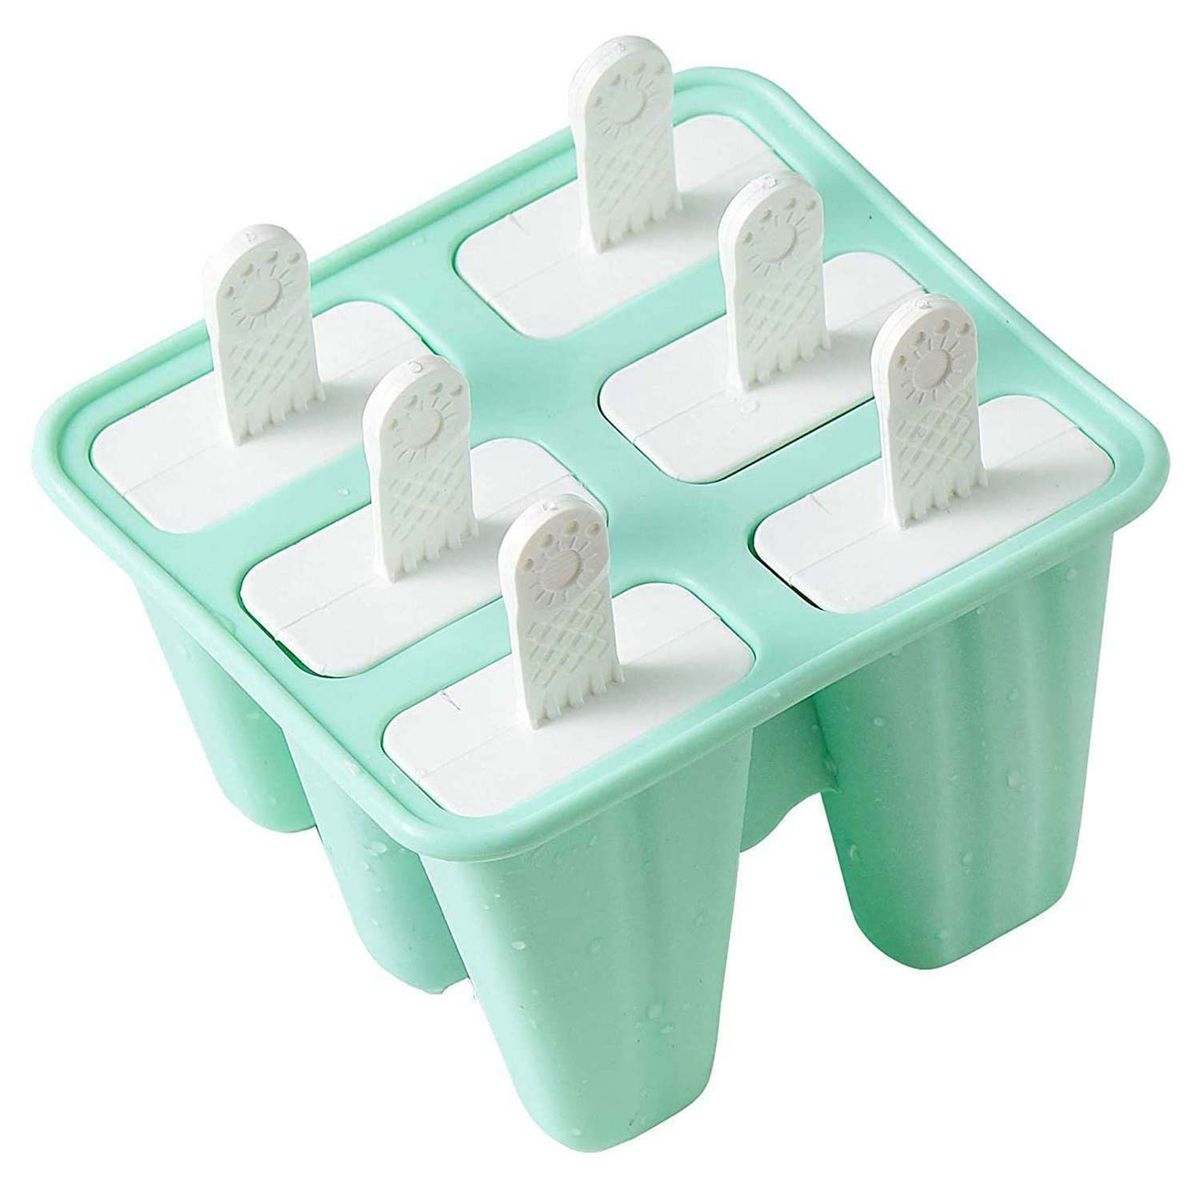 Popsicle Mould，Popsicle Molds 6 Pieces Silicone Ice Pop Molds